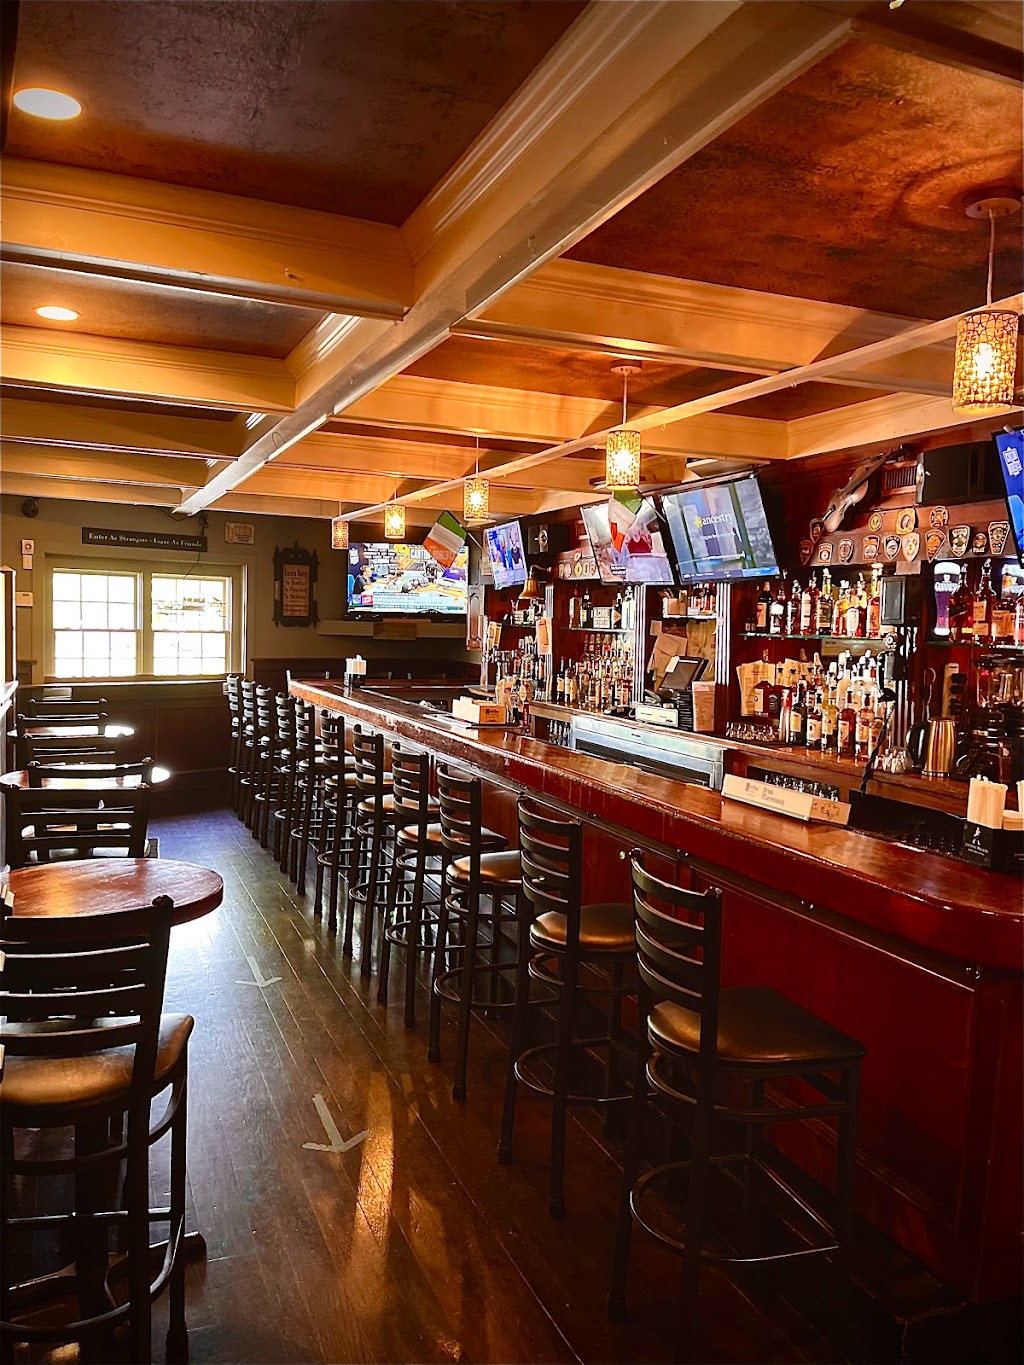 The Old Place Bar & Restaurant | 920 Hope St, Stamford, CT 06907 | Phone: (203) 553-9220